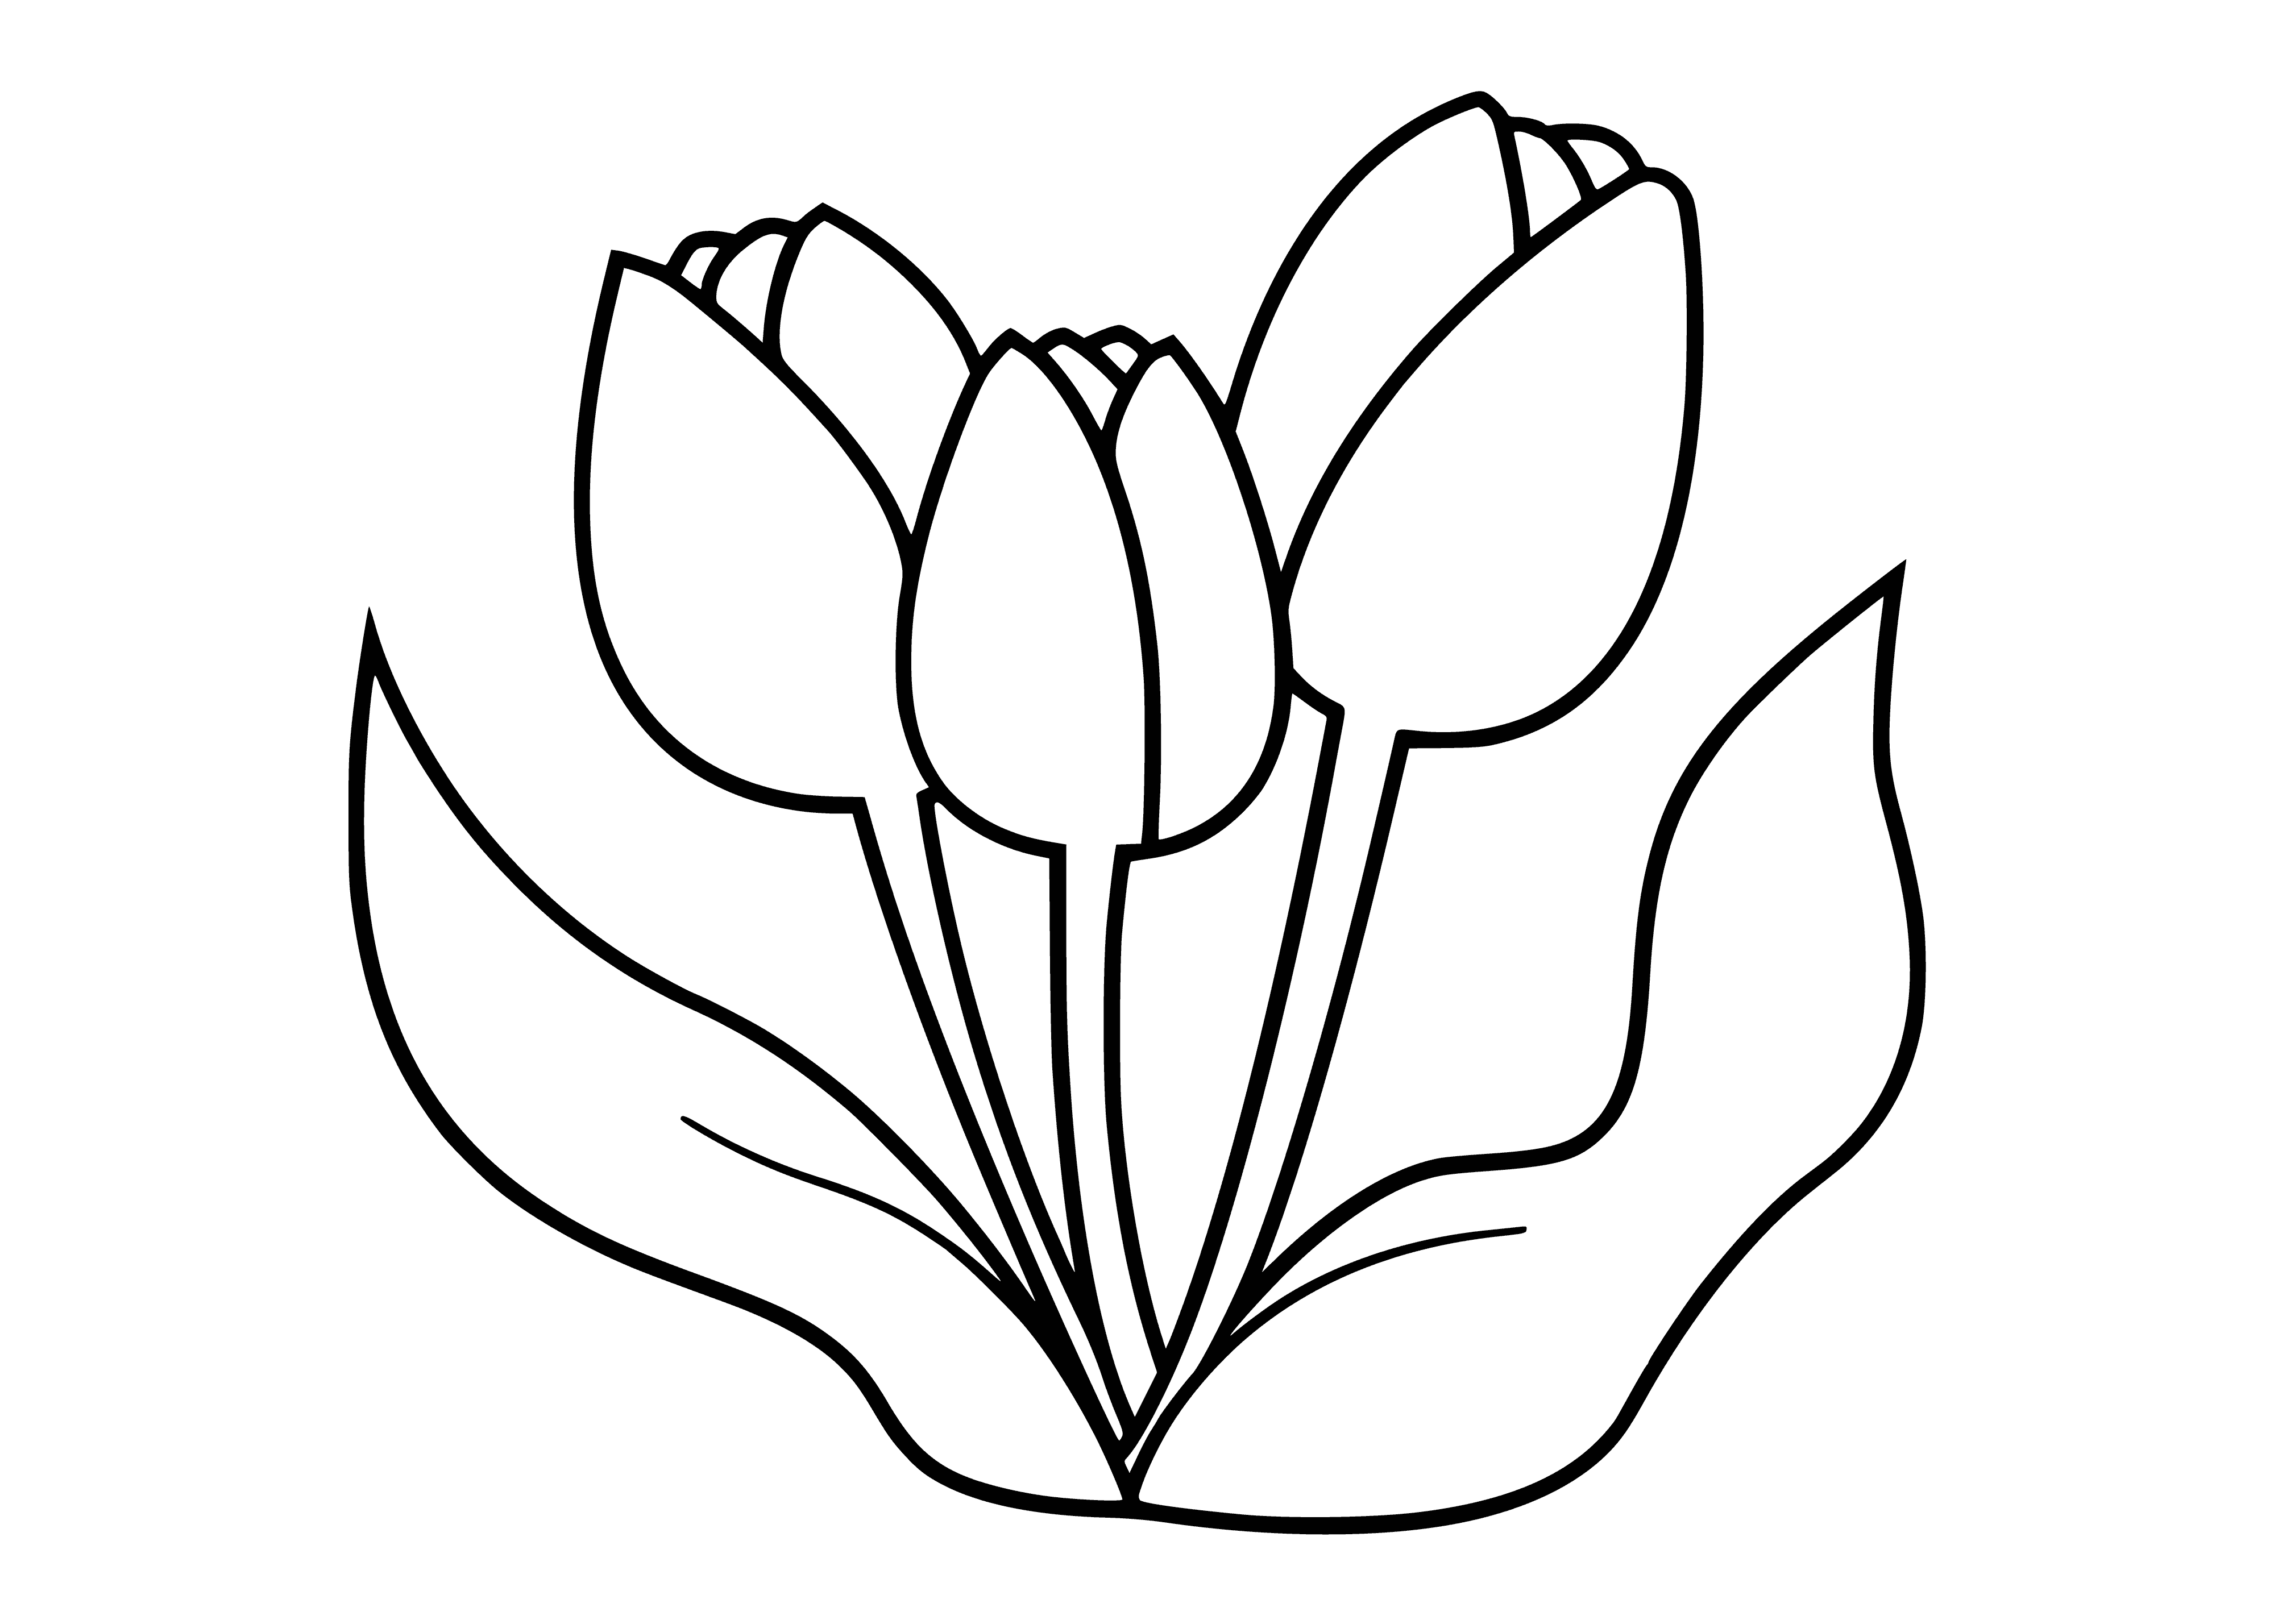 coloring page: Tulips have colorful petals, usually found in gardens and fields, varying from white to yellow to pink to red.